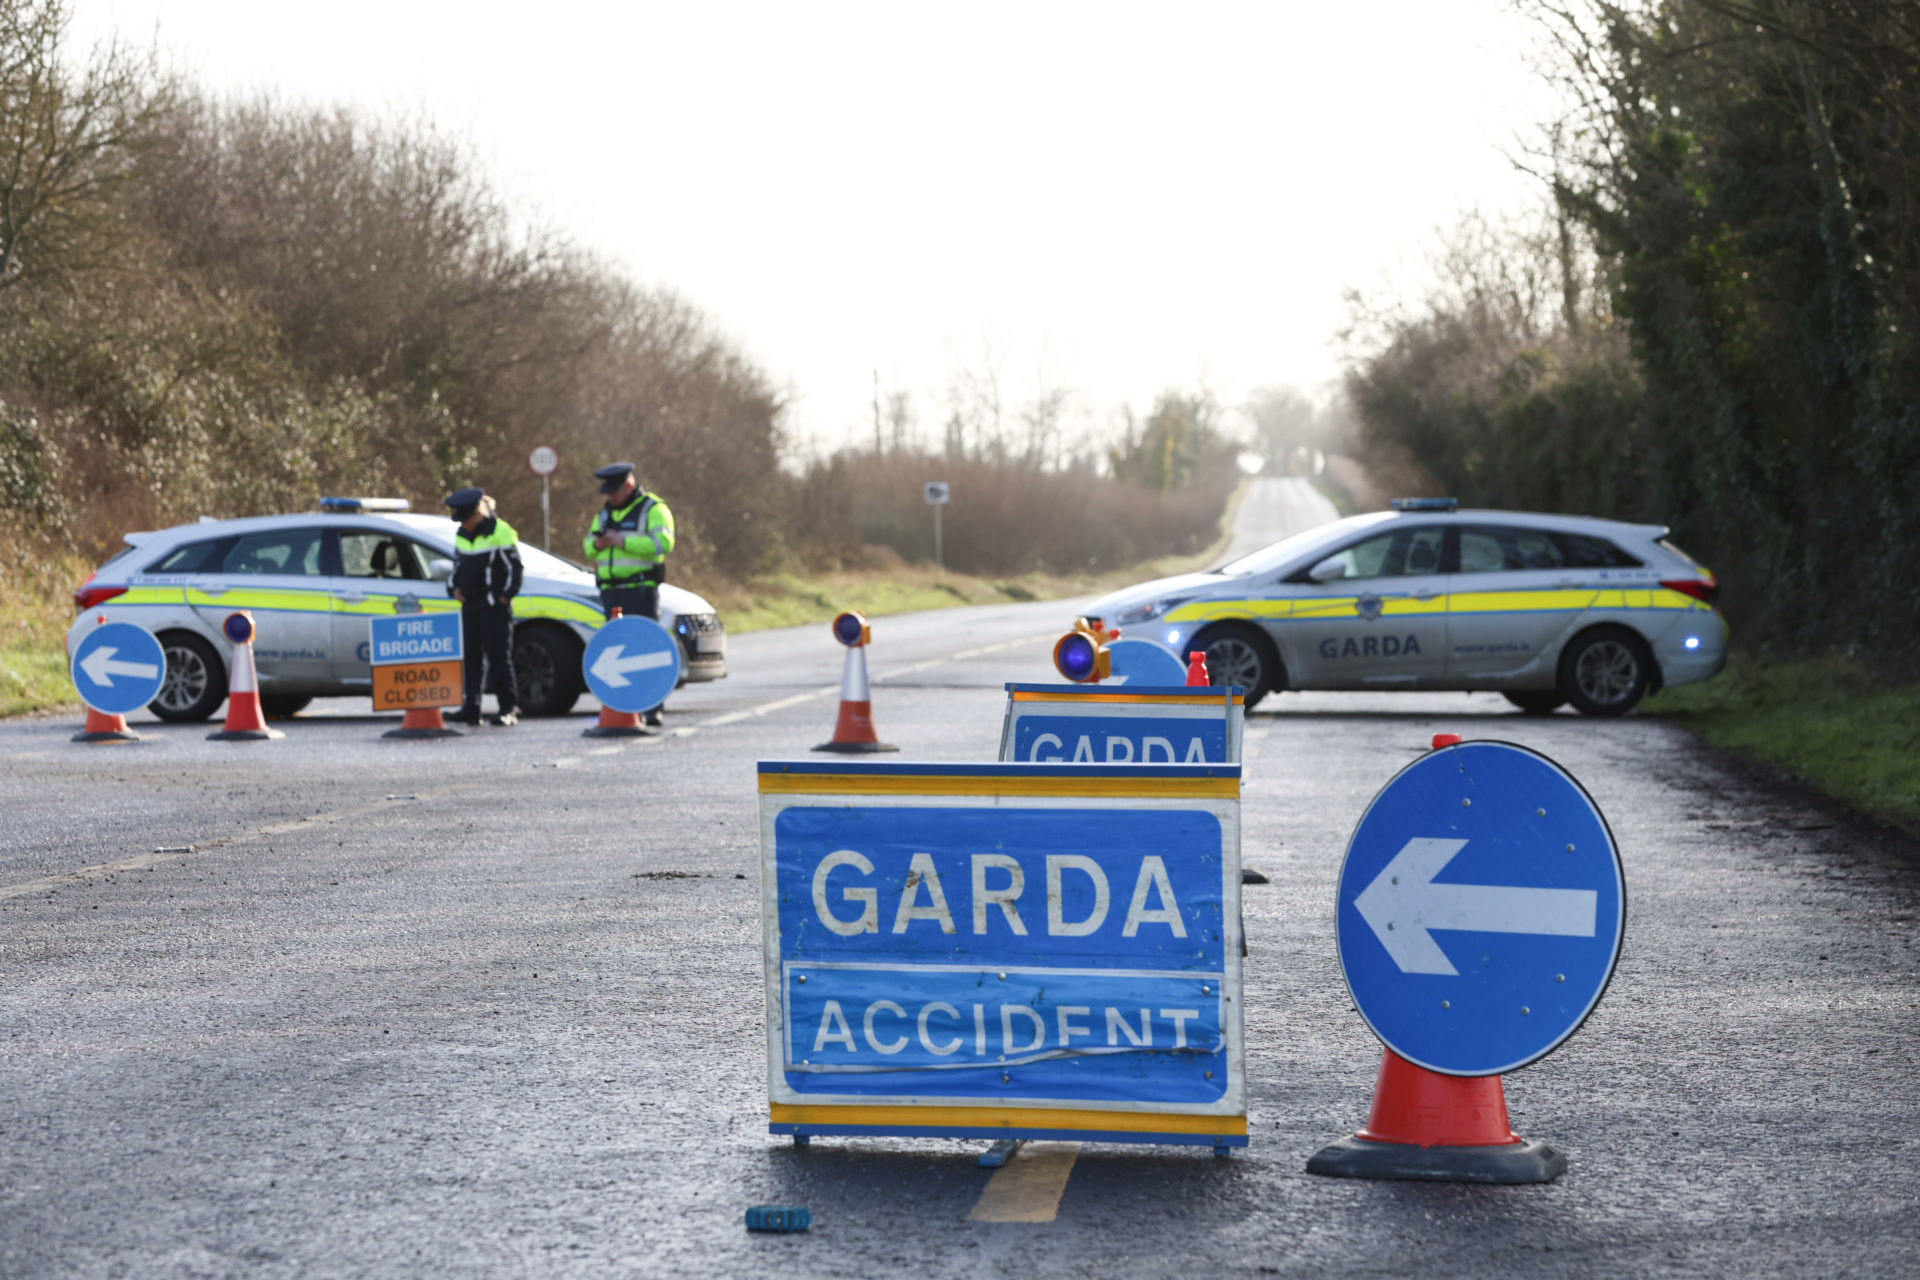 Gardaí at the scene of a crash that killed three people in County Carlow